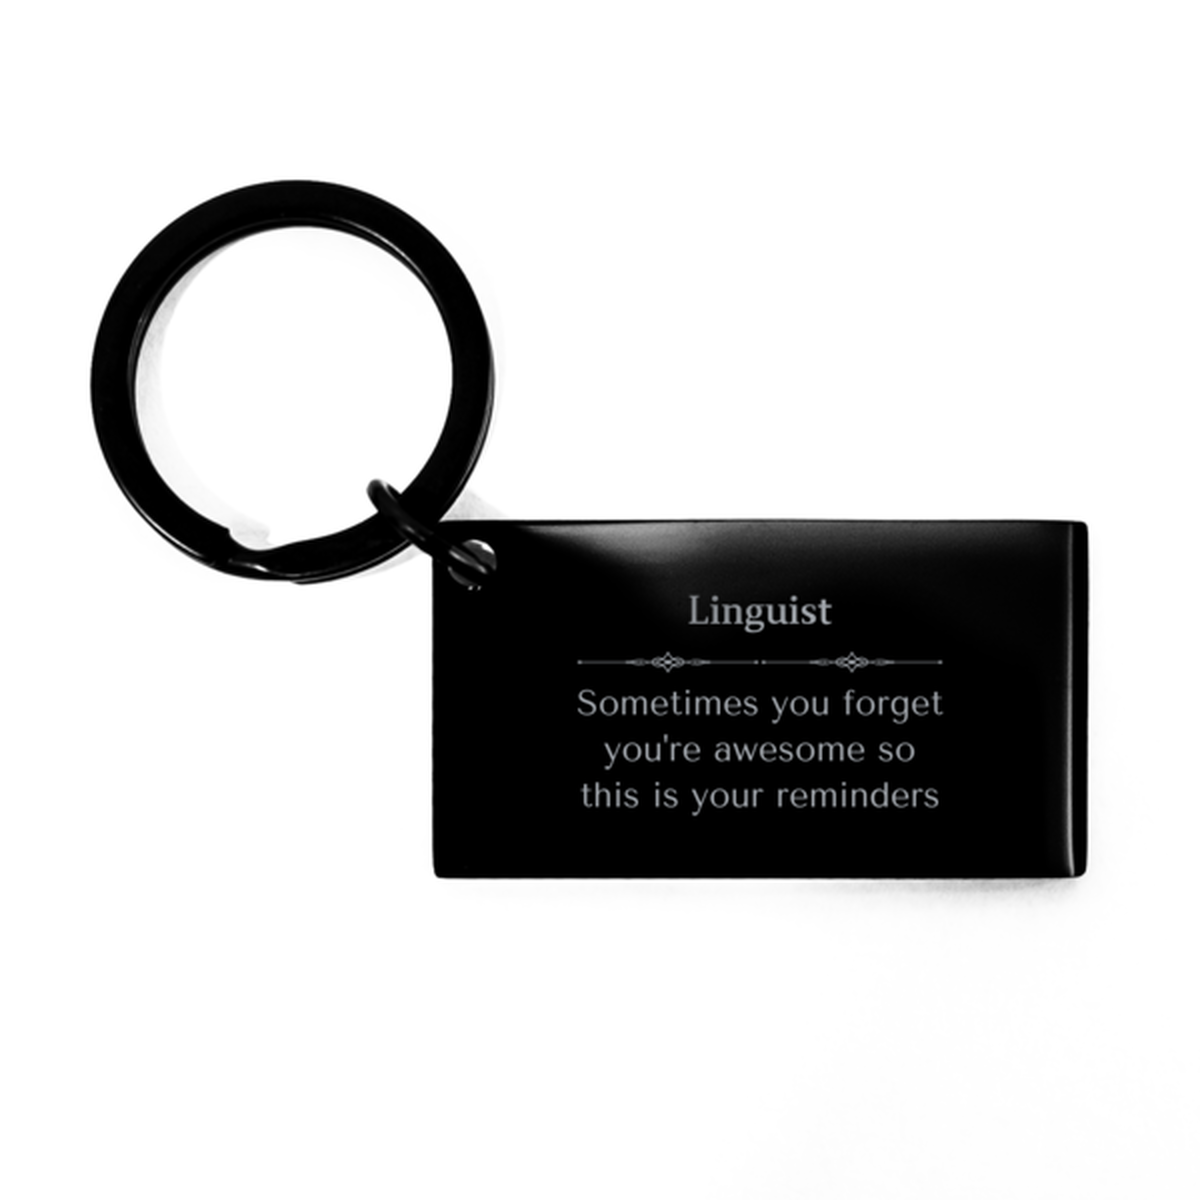 Sentimental Linguist Keychain, Nuclear Scientist Sometimes you forget you're awesome so this is your reminders, Graduation Christmas Birthday Gifts for Linguist, Men, Women, Coworkers